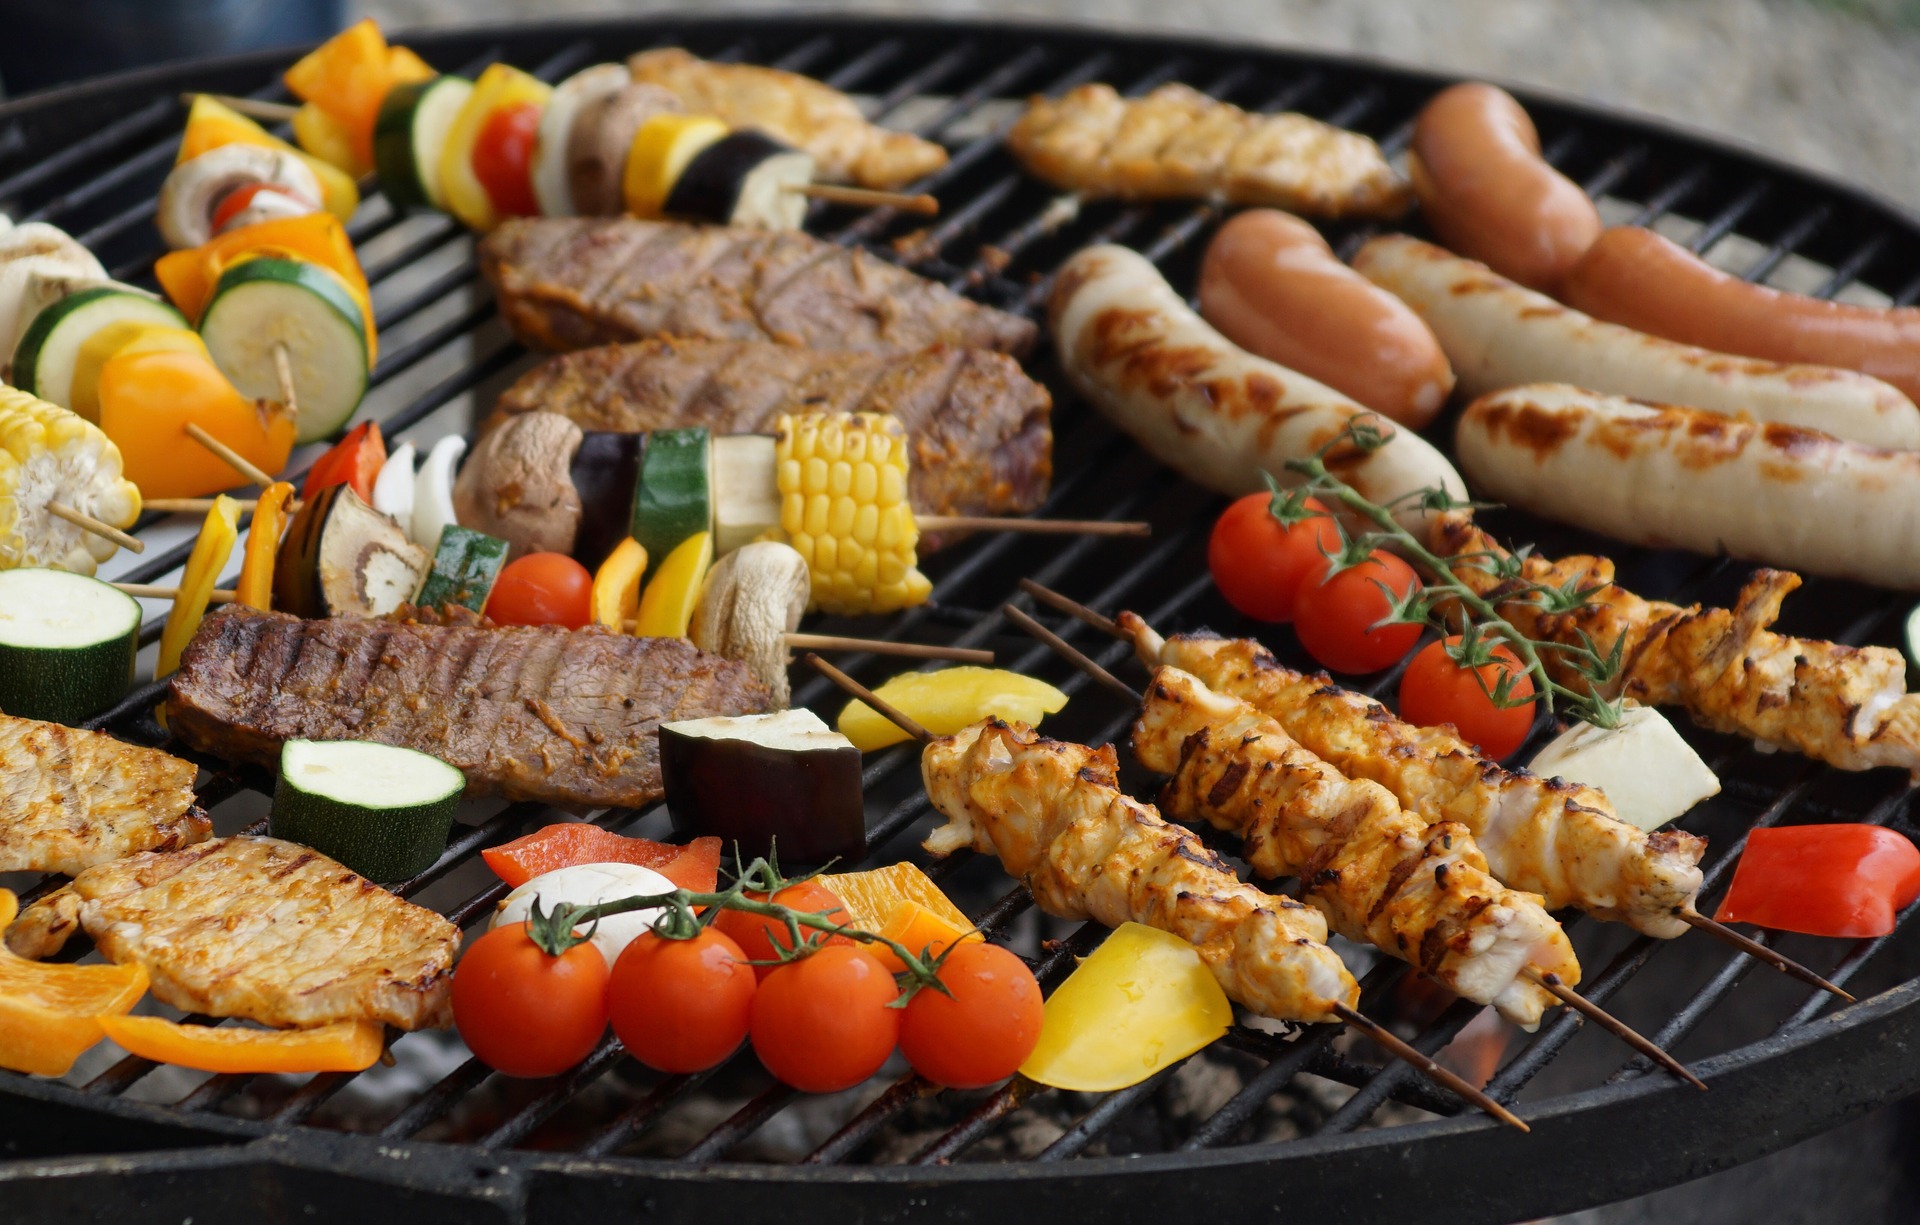 Safety is paramount while grilling. (Photo courtesy of Pixabay)